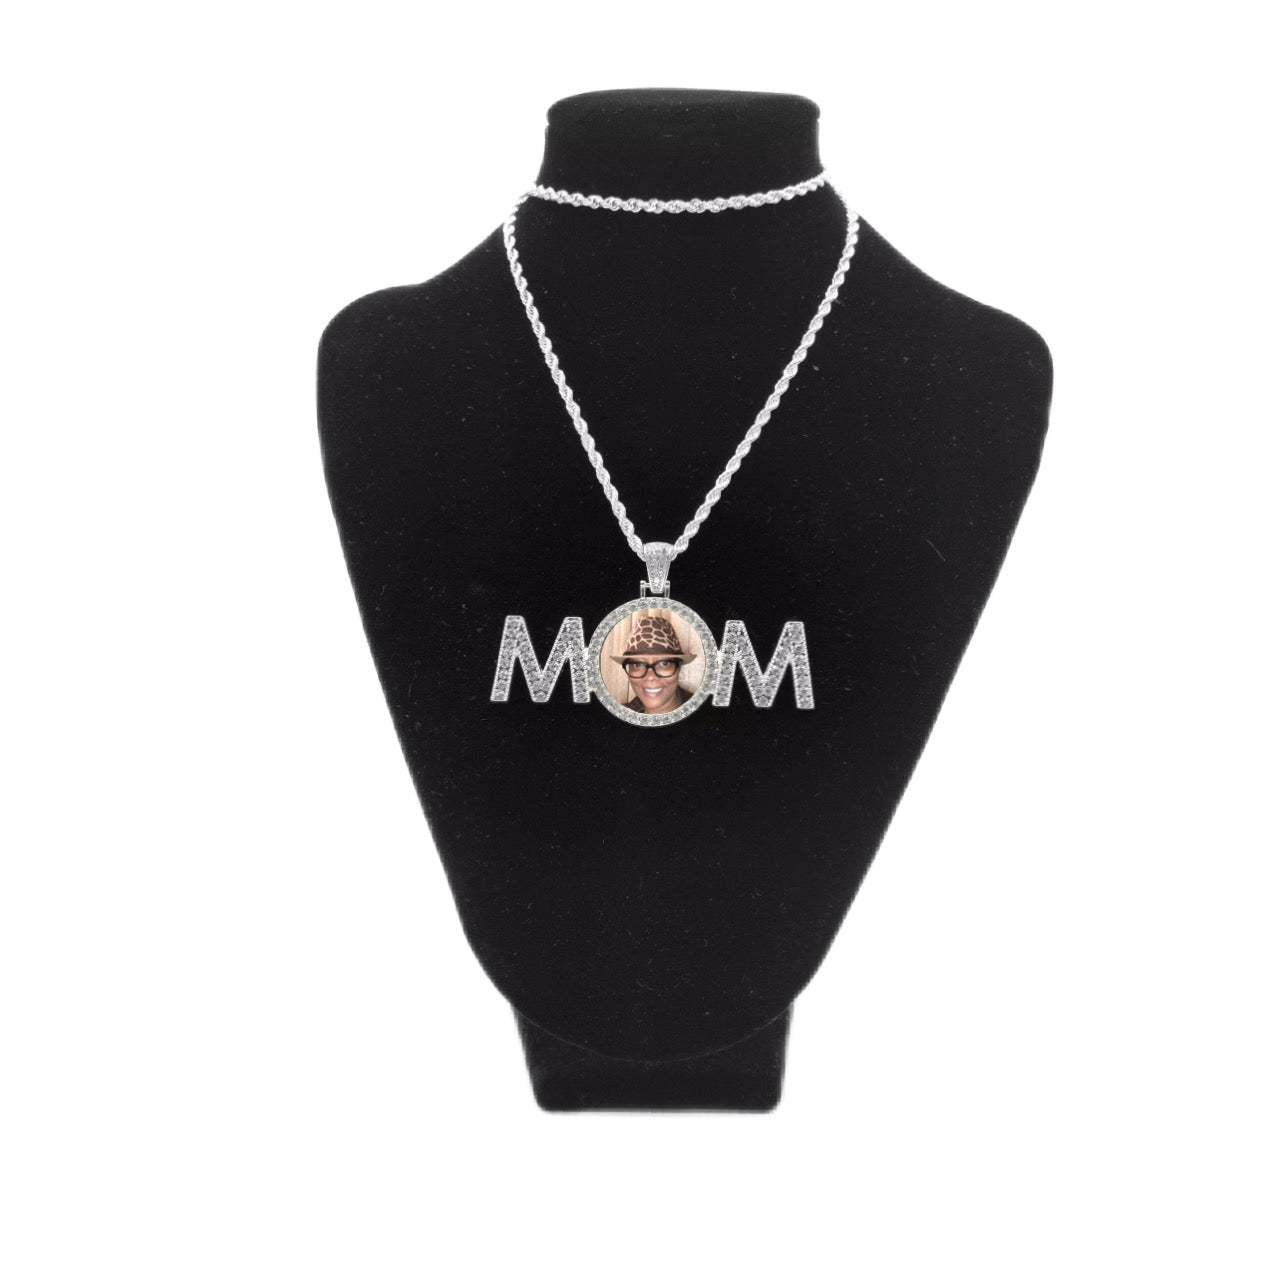 Mom Bling Photo Necklace